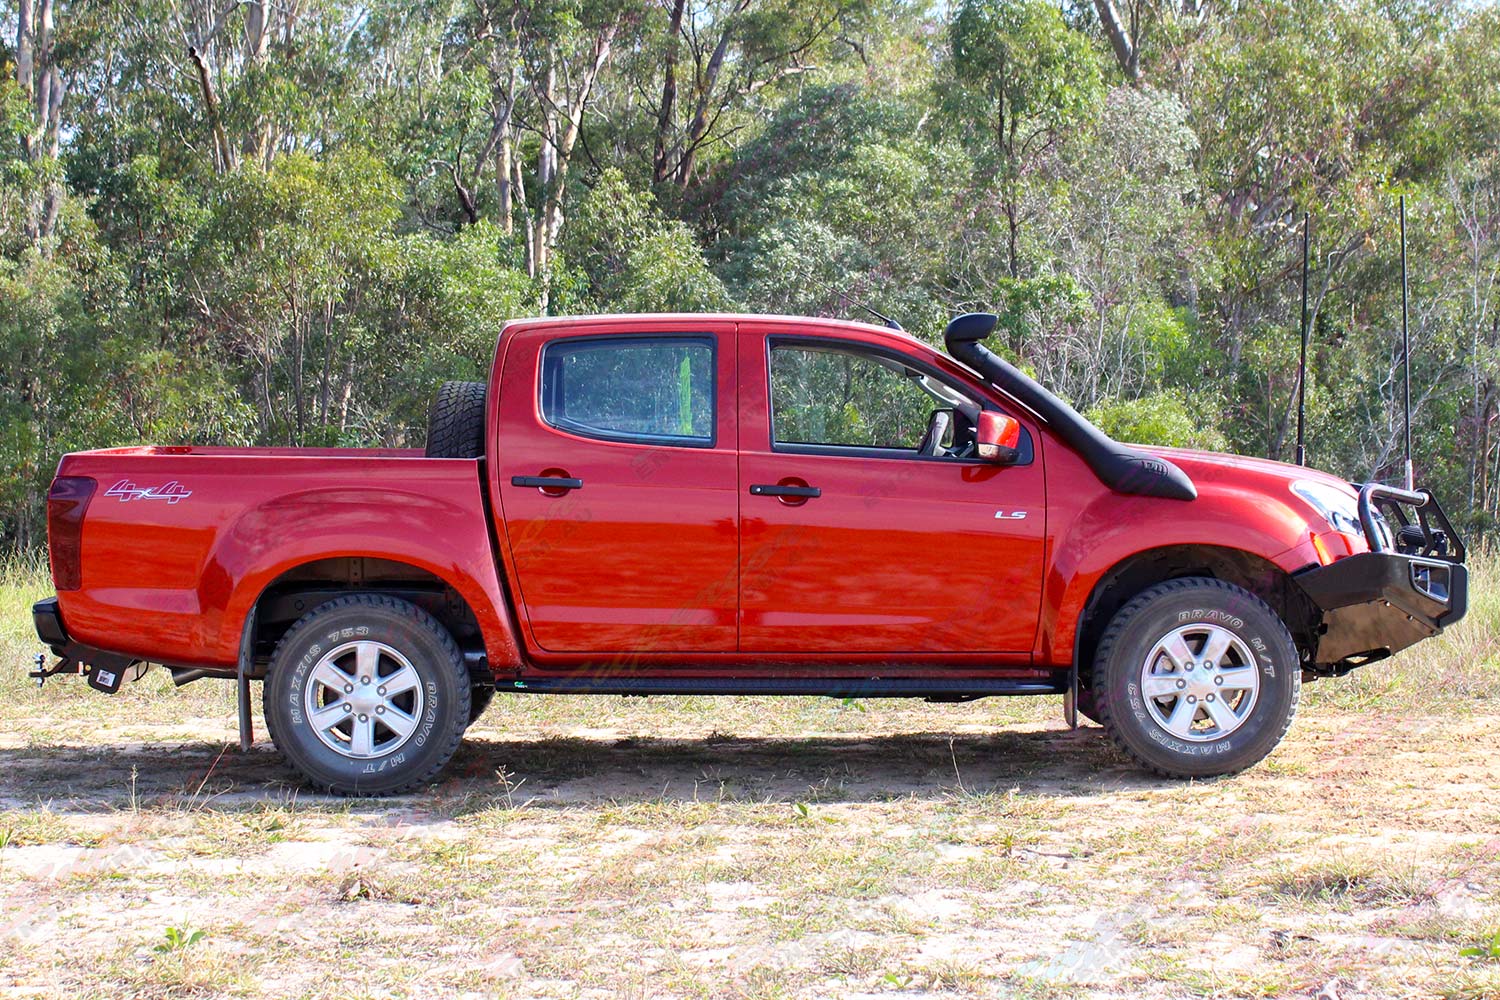 Right side view of a Isuzu D-Max dual cab fitted with a Bullbar, side steps, towbar, snorkel, uhf radio and lightbar